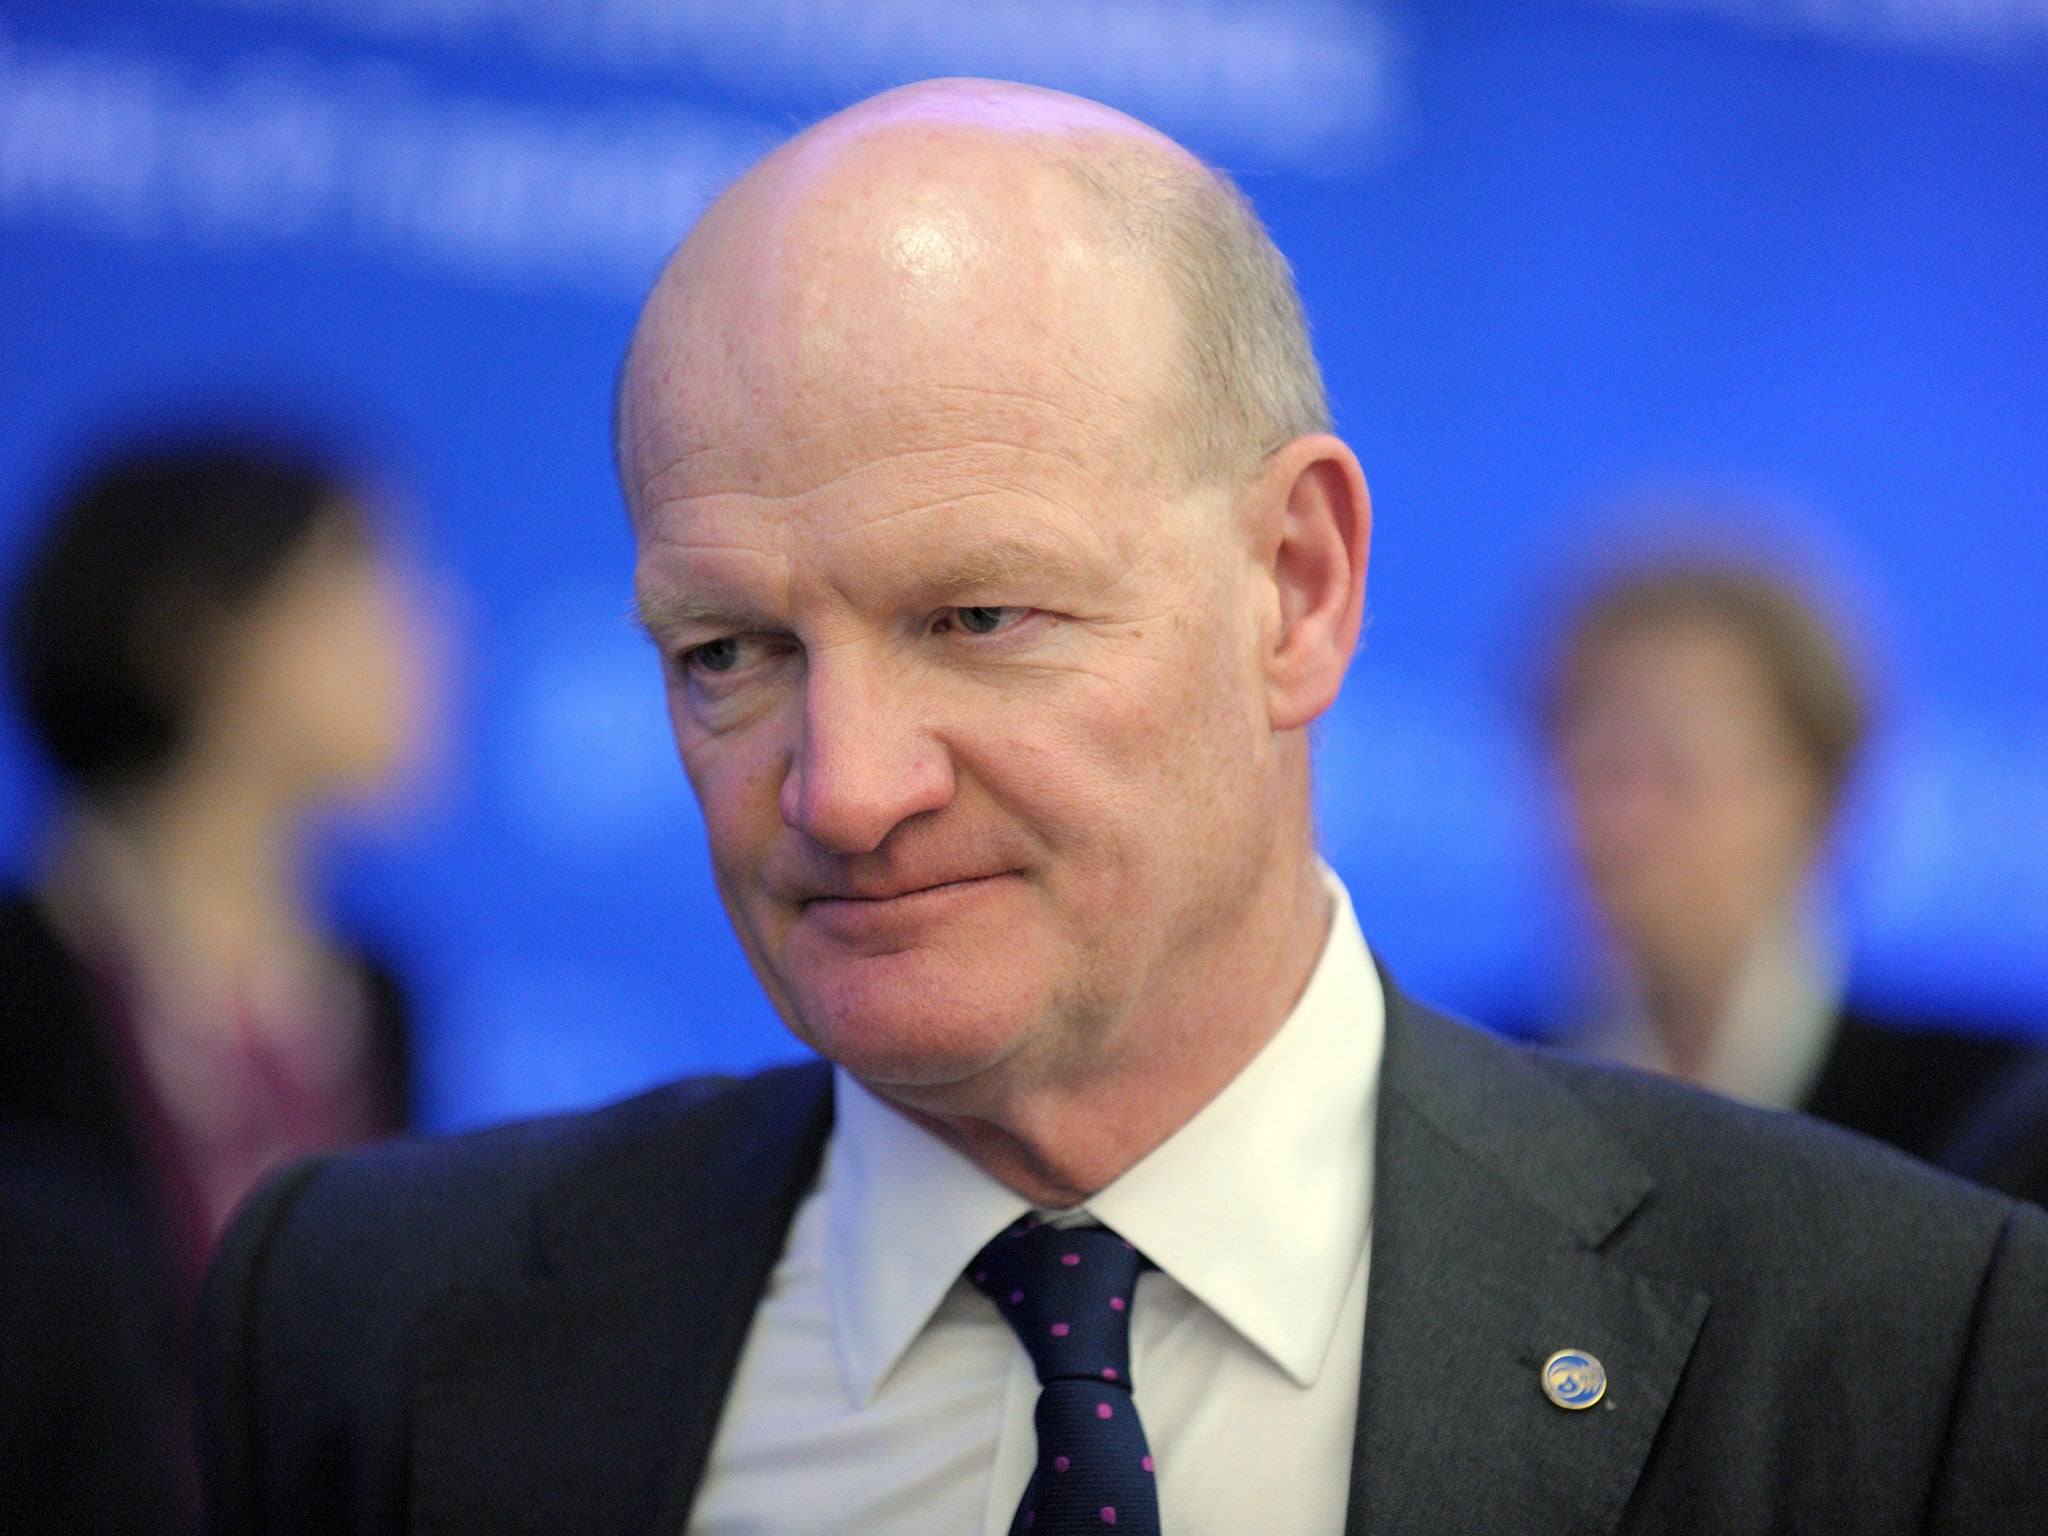 'The age of tax cuts is over,' Lord Willetts will say